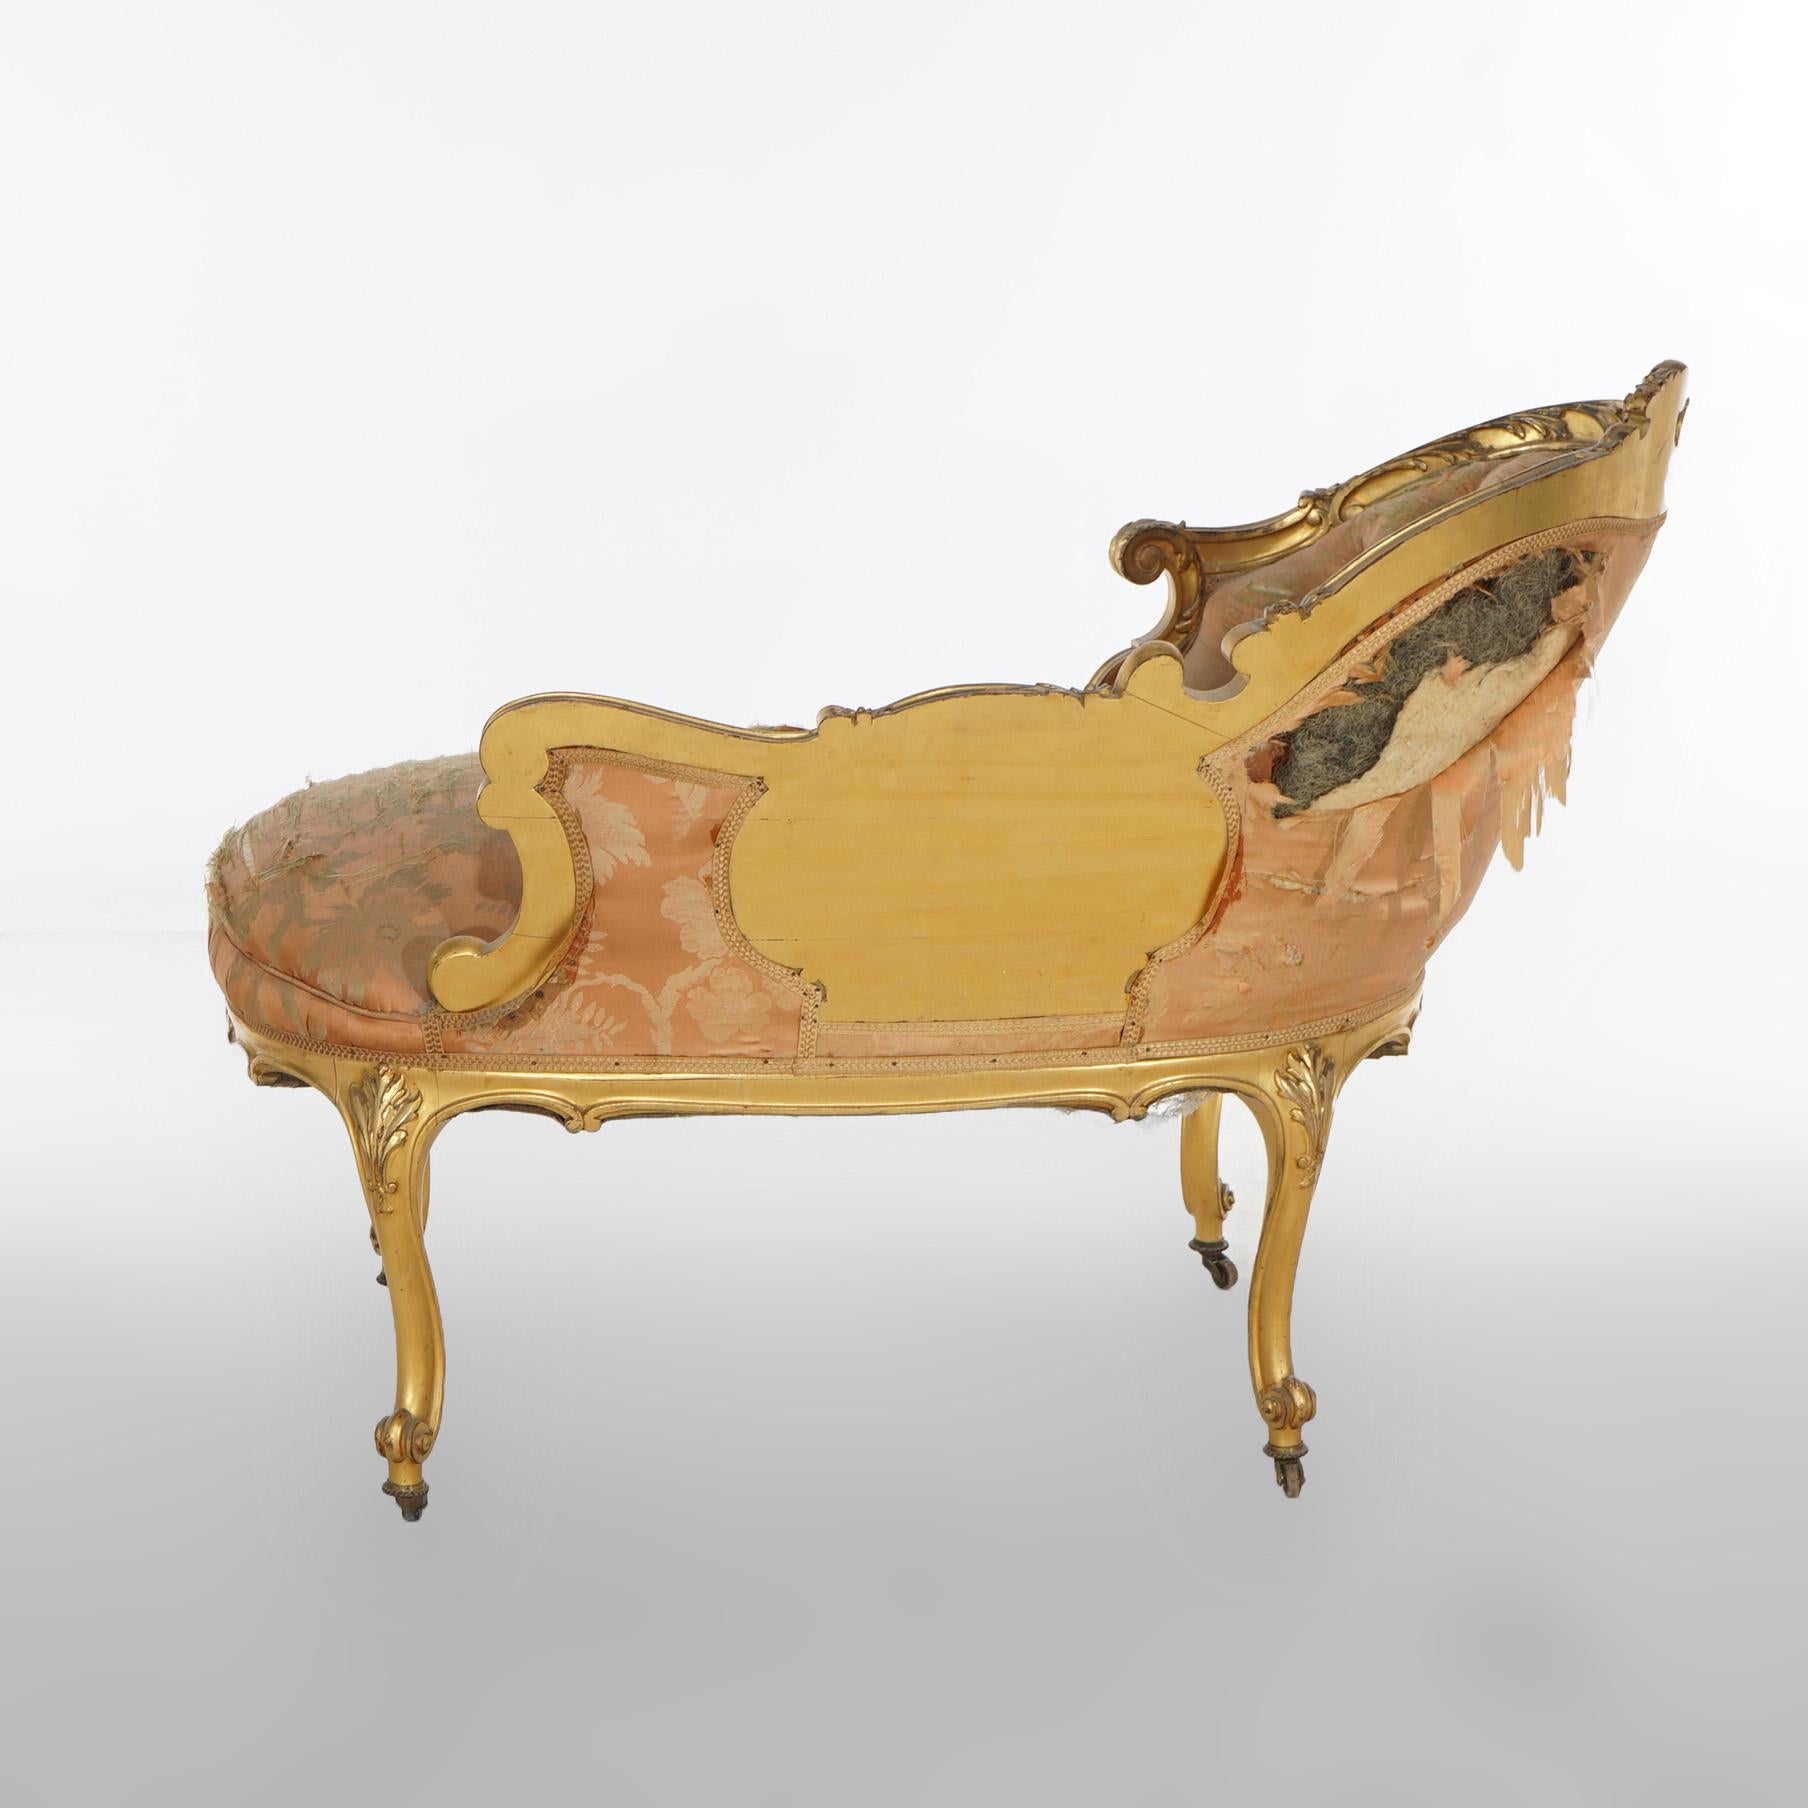 Early Antique French Rococo Vernis Martin & Giltwood Half-Recamier Settee 19th C For Sale 7